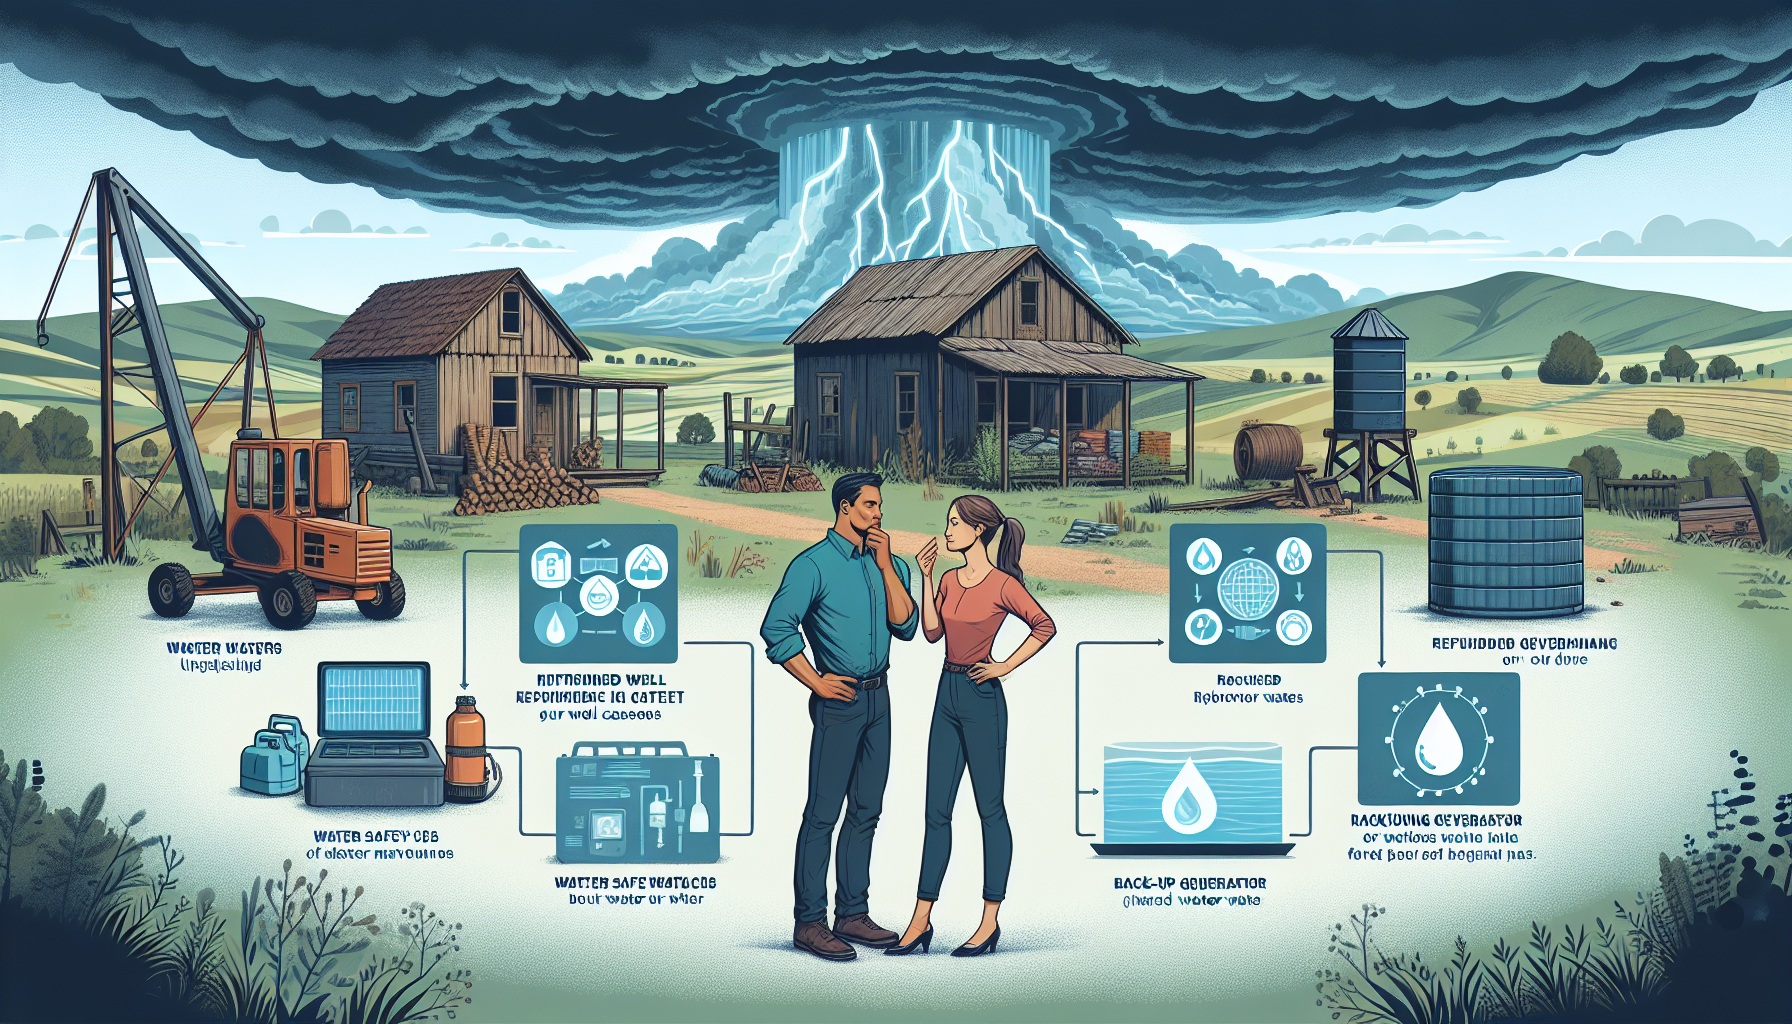 Are There Resources For Well Owners Concerned About Well Water Resilience During Disasters?